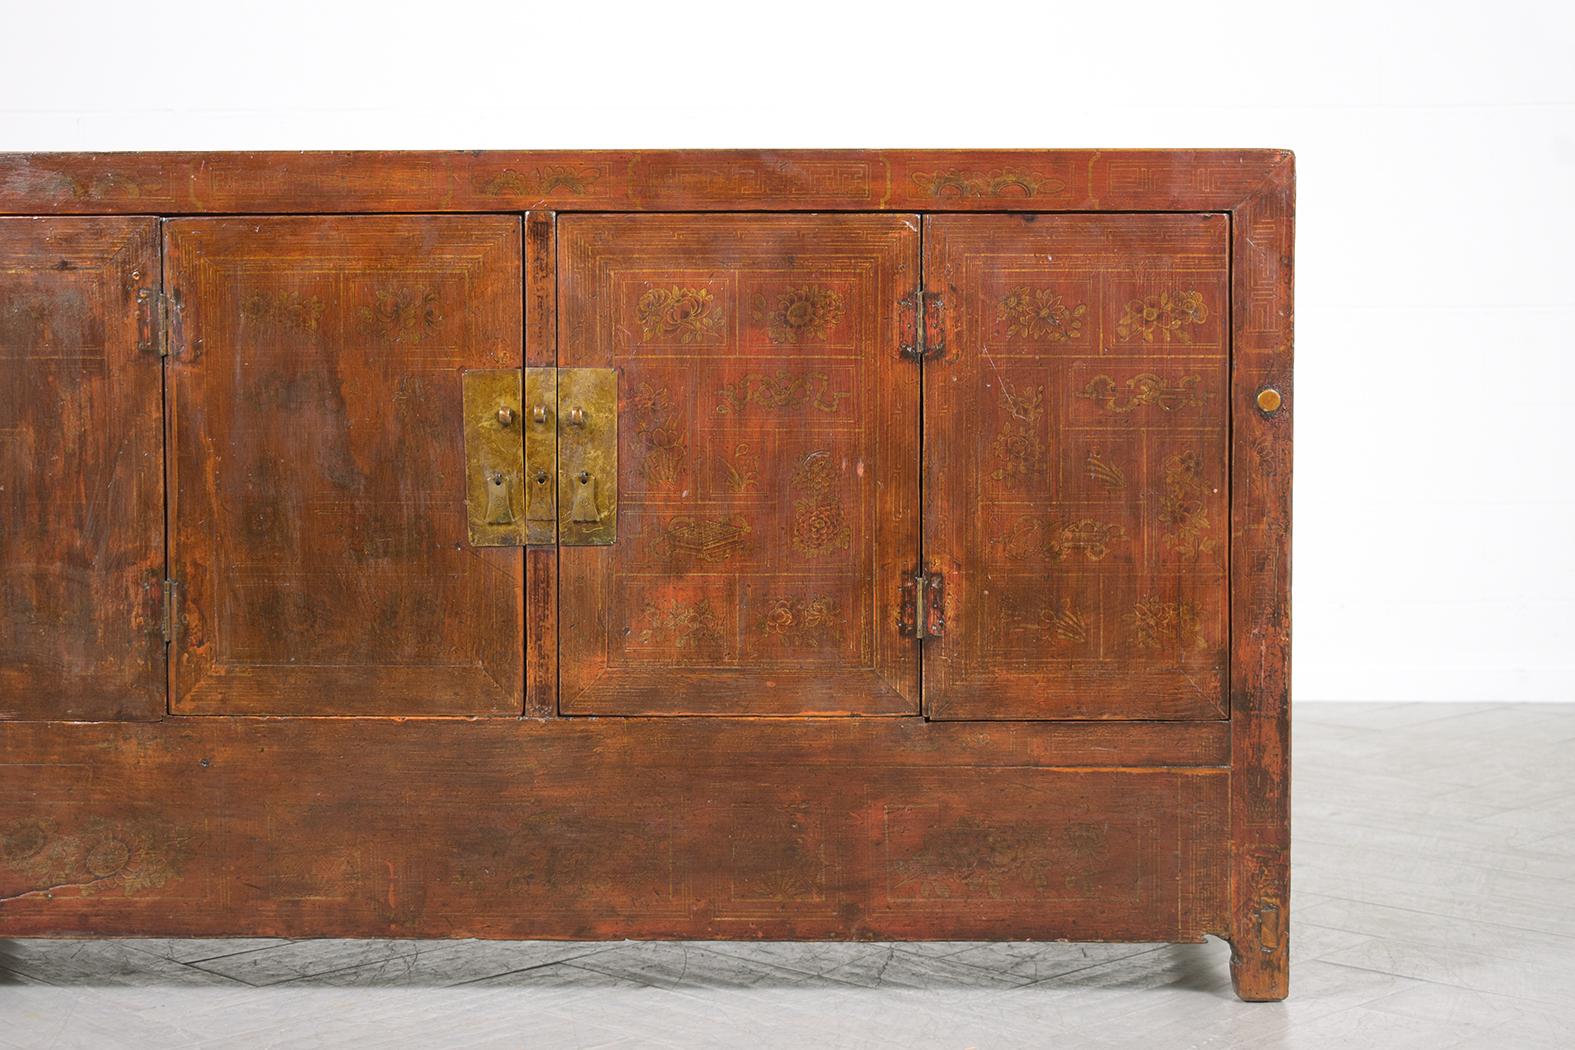 Hand-Crafted 1980s Vintage Chinese Elm Wood Sideboard: Hand-Painted Floral & Brass Accents For Sale